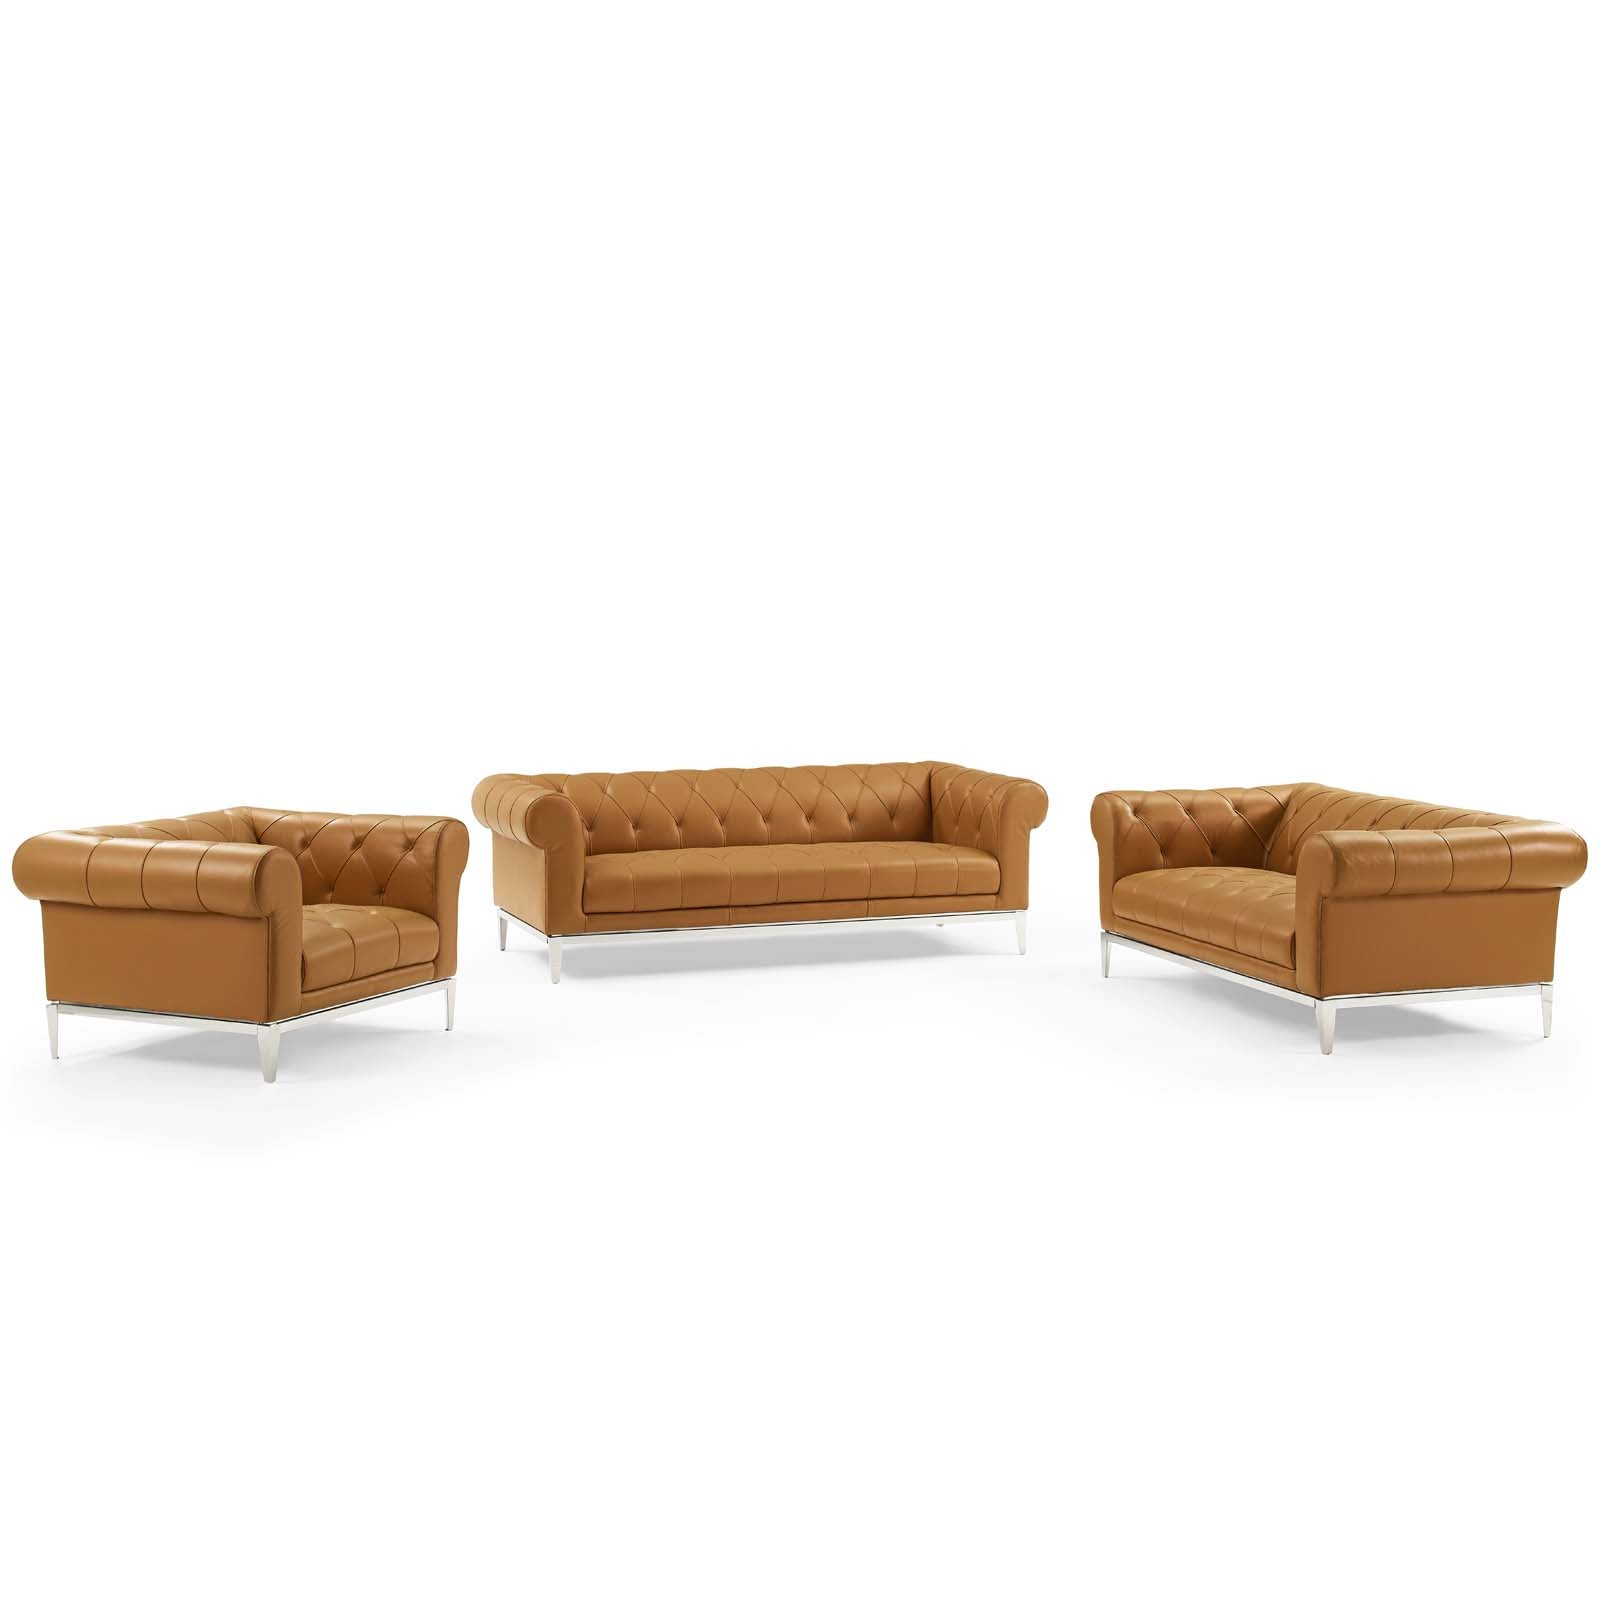 Modway Living Room Sets - Idyll-3-Piece-Upholstered-Leather-Set-Tan